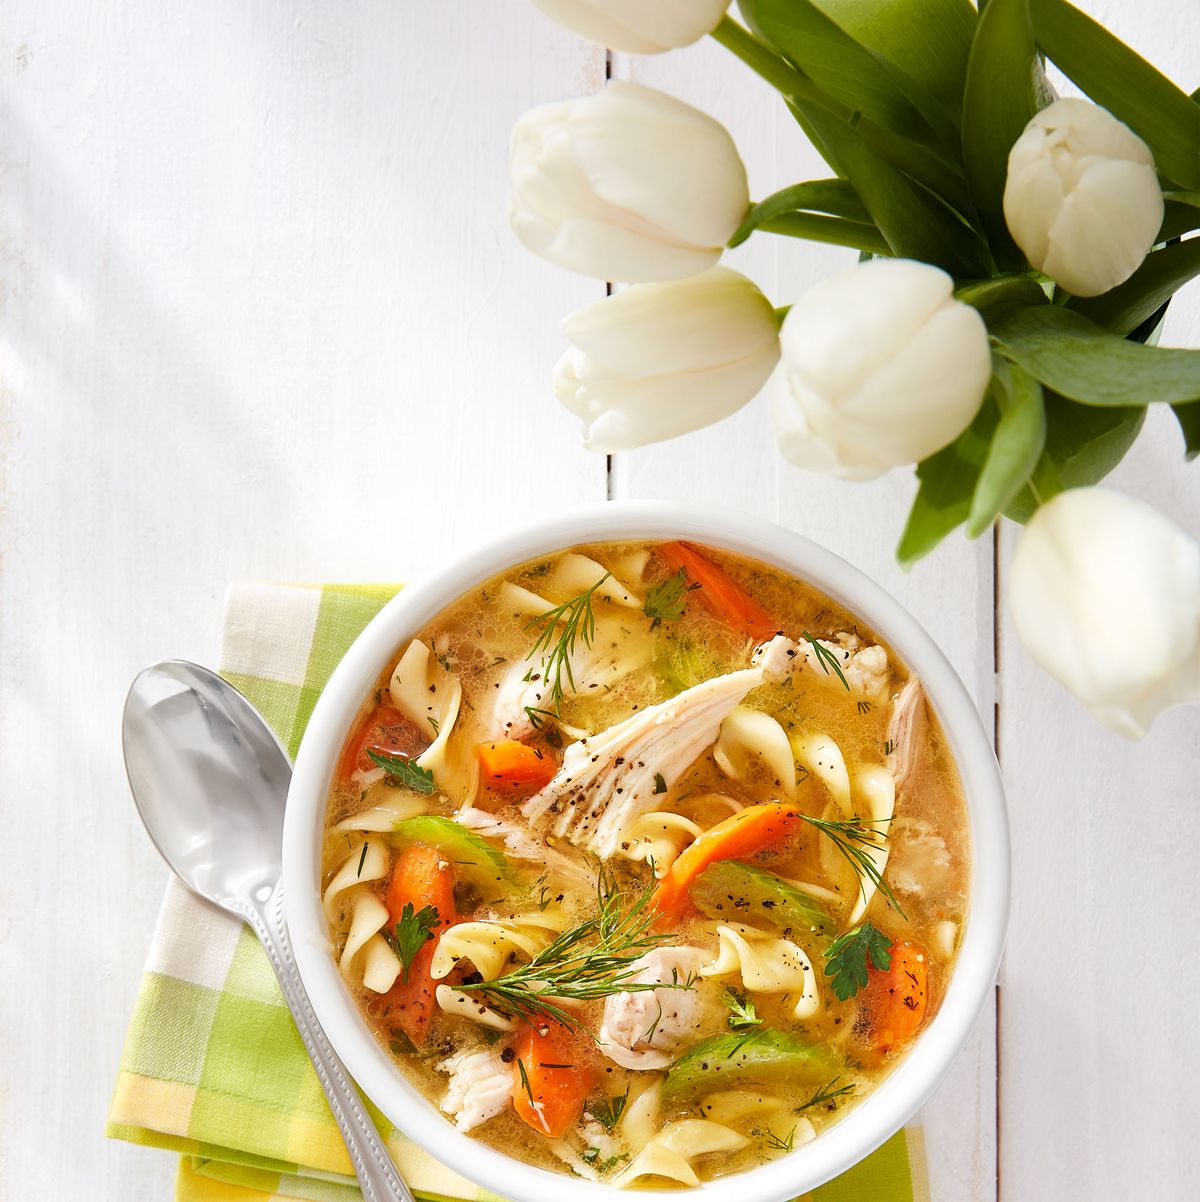 https://hips.hearstapps.com/hmg-prod/images/ultimate-chicken-noodle-soup-1674586615.jpg?crop=1.00xw:0.668xh;0,0.140xh&resize=1200:*